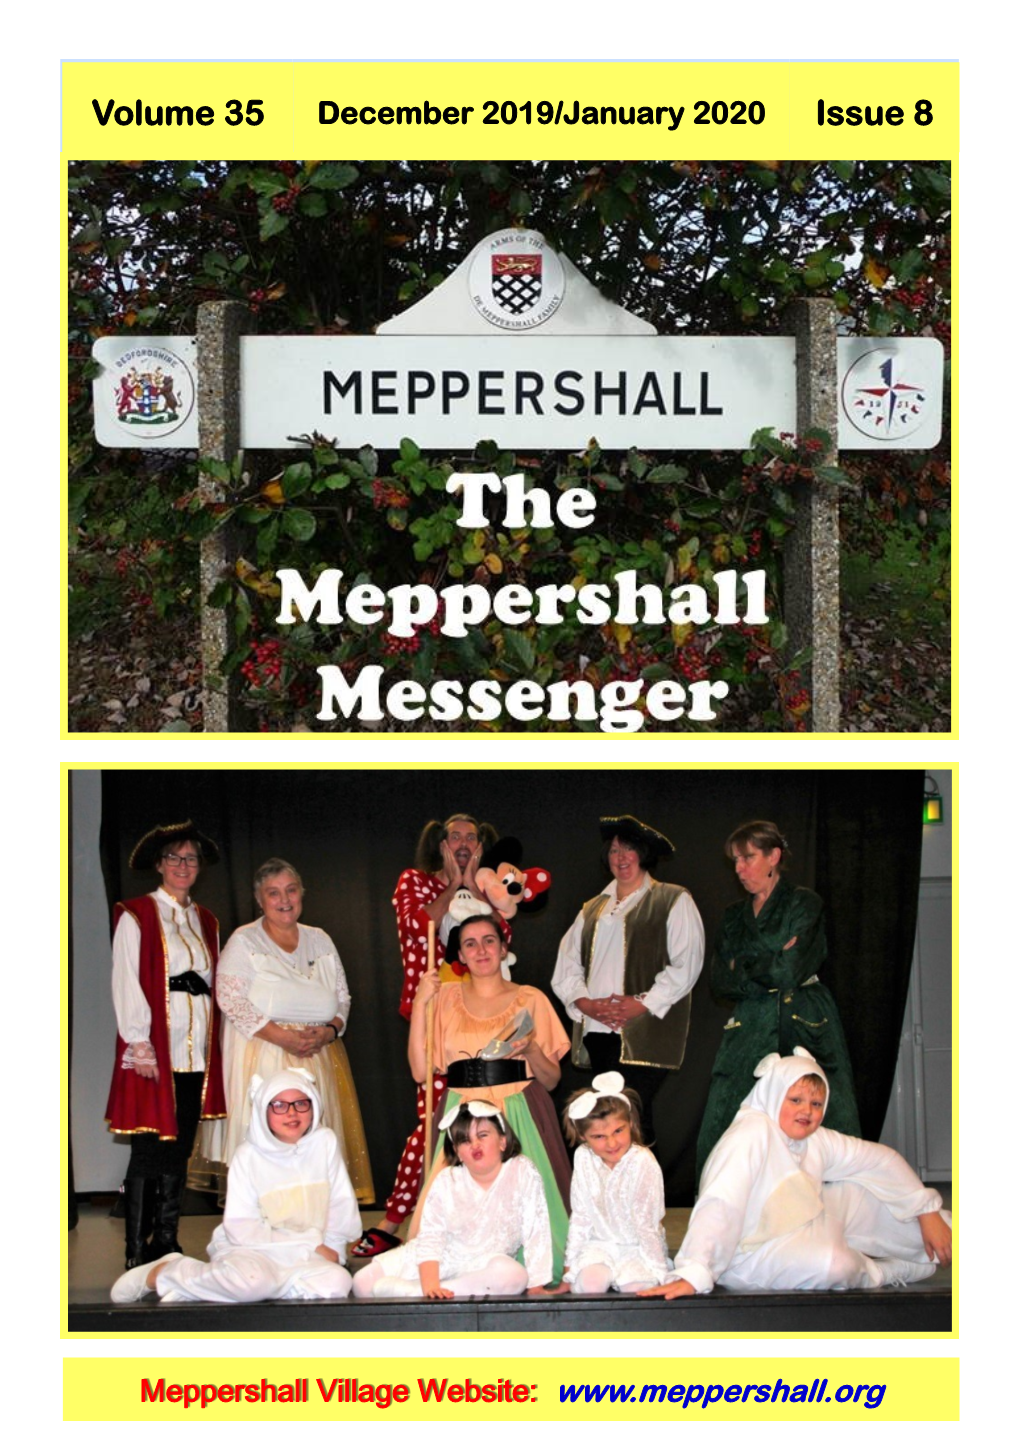 Meppershall at Christmas